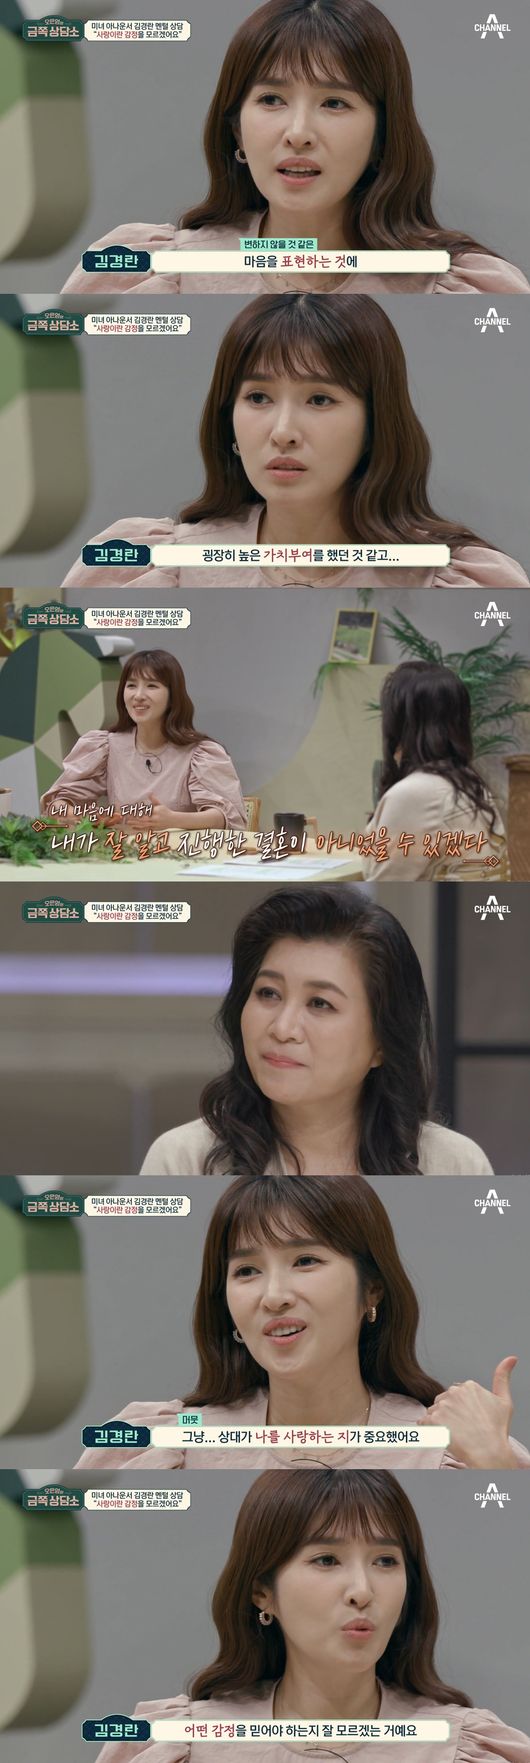 Kim Kyung-ran has been honest about his troubles.On the 5th, Channel A Oh Eun Youngs Golden Counseling Center attracted attention by mentioning the marriage with former Husband by Announcer Kim Kyung-ran as a guest.Kim Kyung-ran said, One of the stories I heard a lot in my life was that I was trapped in your frame. I left 10 years ago.Park Narae was surprised to say, I thought it was 10 years ago.Kim Kyung-ran said, I have a lot of poor sides and I fall over here and over there, and I have to be nervous when I work, so I think its imprinted.However, Kim Kyung-ran has excellent self-management, and no one has seen Kim Kyung-rans people at K headquarters, said Jin Young-don.Kim Kyung-ran said, I did not have to clean it because I had to do it again after two hours.Oh Eun Young also sympathized and said, If you are too tired, you will not erase your makeup and sometimes sleep.Kim Kyung-ran said: In fact I broke a lot of frames, I went into press notices and went into public bonds and left the company, I did a divorce.But I do not know why I keep breaking the frame, he said. Some people tell me to keep the image well so that it does not collapse.Someone else tells me to break the frame how long I will stay in the place. Oh Eun Young said, The frame has a frame that others have created and there is a frame that I adhere to. There is a frame that I think I should keep. Some people have important values ​​of life.Thats my frame, said Oh Eun Young, who then gave an example, My frame is not to drink unless its on vacation.Kim Kyung-ran said of his frame: Its about eating Pilates twice a week, two other exercises, breakfast all the time.Even if you drink the other day, you eat sandwiches for breakfast. Kim Kyung-ran said, For me, bed is not a space other than sleeping. Lee Yoon-ji said, I am too. I said that I had never seen a mother who had a baby and did not lie in bed.Kim Kyung-ran said, I do not know how I like it. My father always said that I should meet a man who likes me.I gave a lot of added points to someone who liked me because of the experience of being bullied when I was a child or the experience of rejecting me. Kim Kyung-ran said: I thought I might have liked him after I broke up with someone, I didnt like him much, but I think I had dated him.I thought I would have loved or not know that I was soaking in love. So, Jin Young-don asked, Is not it marriage because I love you?Kim Kyung-ran said, I thought that it might not be a marriage that I knew and proceeded with my mind. It was important that my opponent loved me.I do not know what I should believe in how I love this person. Kim Kyung-ran said, The article was just up and quickly decided to marriage and progressed. Every time I met someone, the article was caught.I felt the burden of getting into a bad job because my job was like this. Oh Eun Young asked, Have you ever had emotional sympathy or emotional understanding while living marriage?I think that part was the worst, Kim Kyung-ran said, but I tried hard to understand, but I couldnt, I dont think I knew too much about my feelings.I do not know my feelings so much that I did not know enough to apologize to myself. Oh Eun Young said, Mr. Kyung-Ran is not a style that hurts others by expressing emotions. If Mr. Kyung-Ran is angry, it will be angry.I think I need to practice thinking about my feelings. Kim Kyung-ran said: I kept asking people if I was hard, I dont believe my feelings.I think I thought that I was going in the wrong direction because I was so short of the decision I made. Oh Eun Young said, There is no wrong mind. The mind is just the mind. You do not have to ask if it is right.